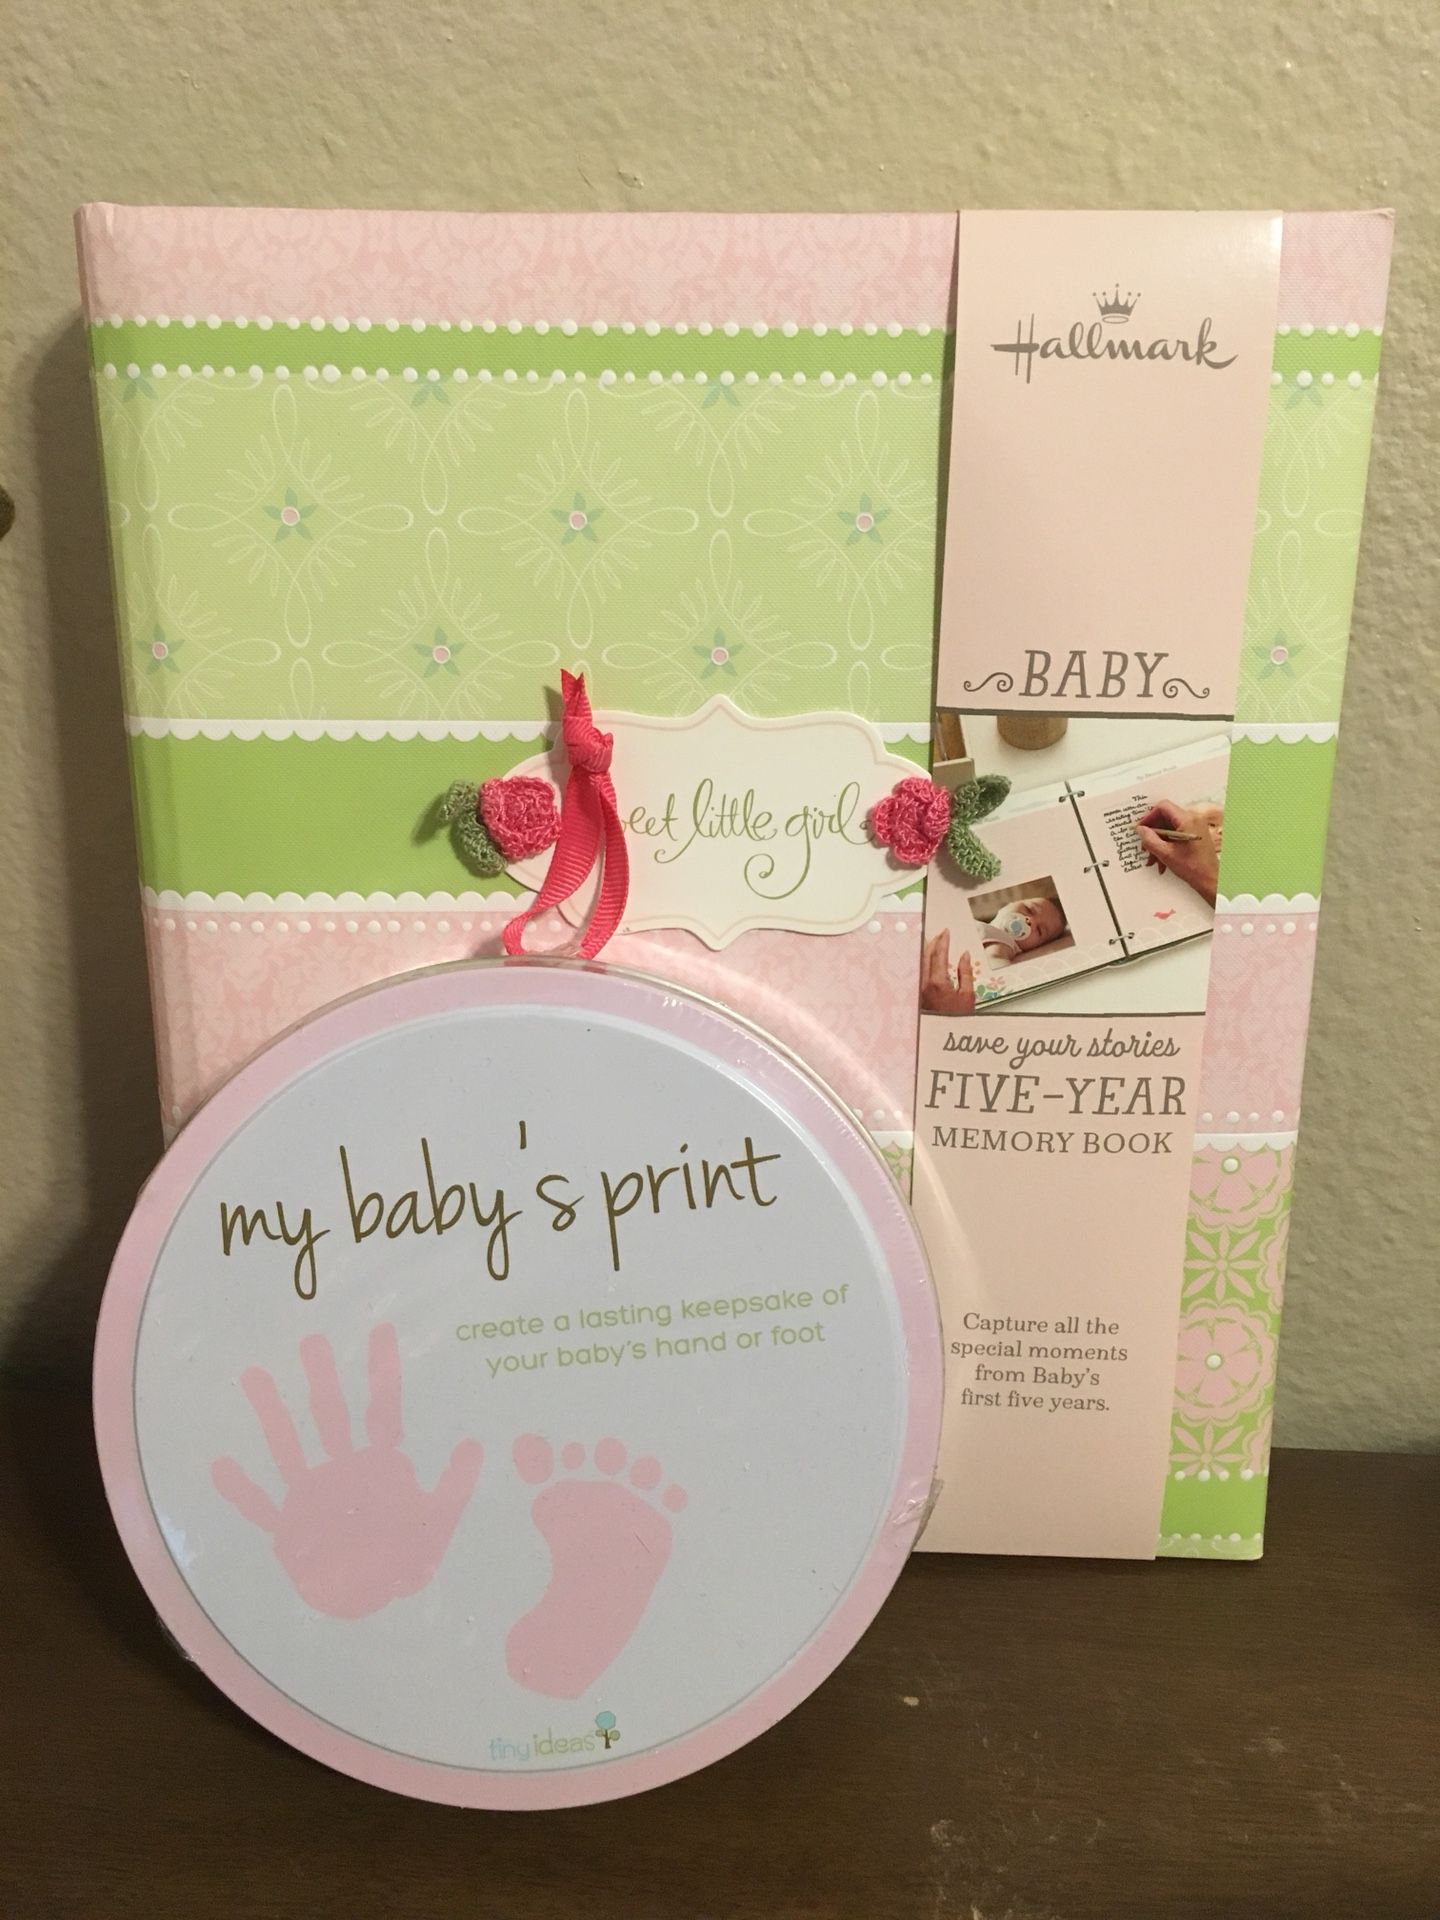 NEW Baby book, hand print and diapers gift set